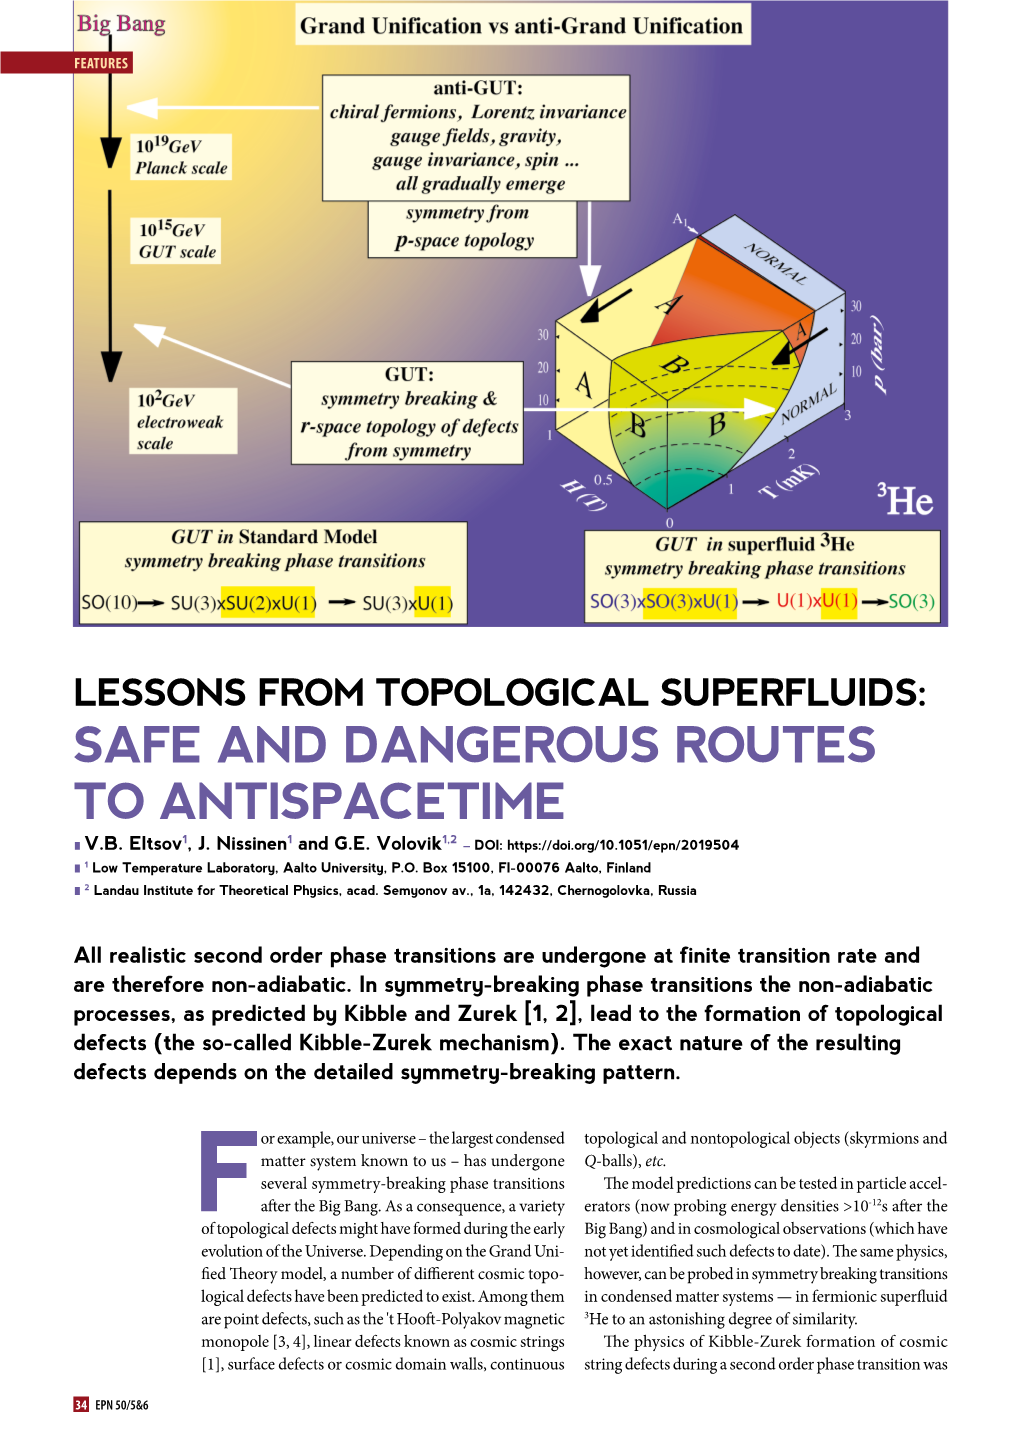 LESSONS from TOPOLOGICAL SUPERFLUIDS: SAFE and DANGEROUS ROUTES to ANTISPACETIME 1 1 1,2 Llv.B